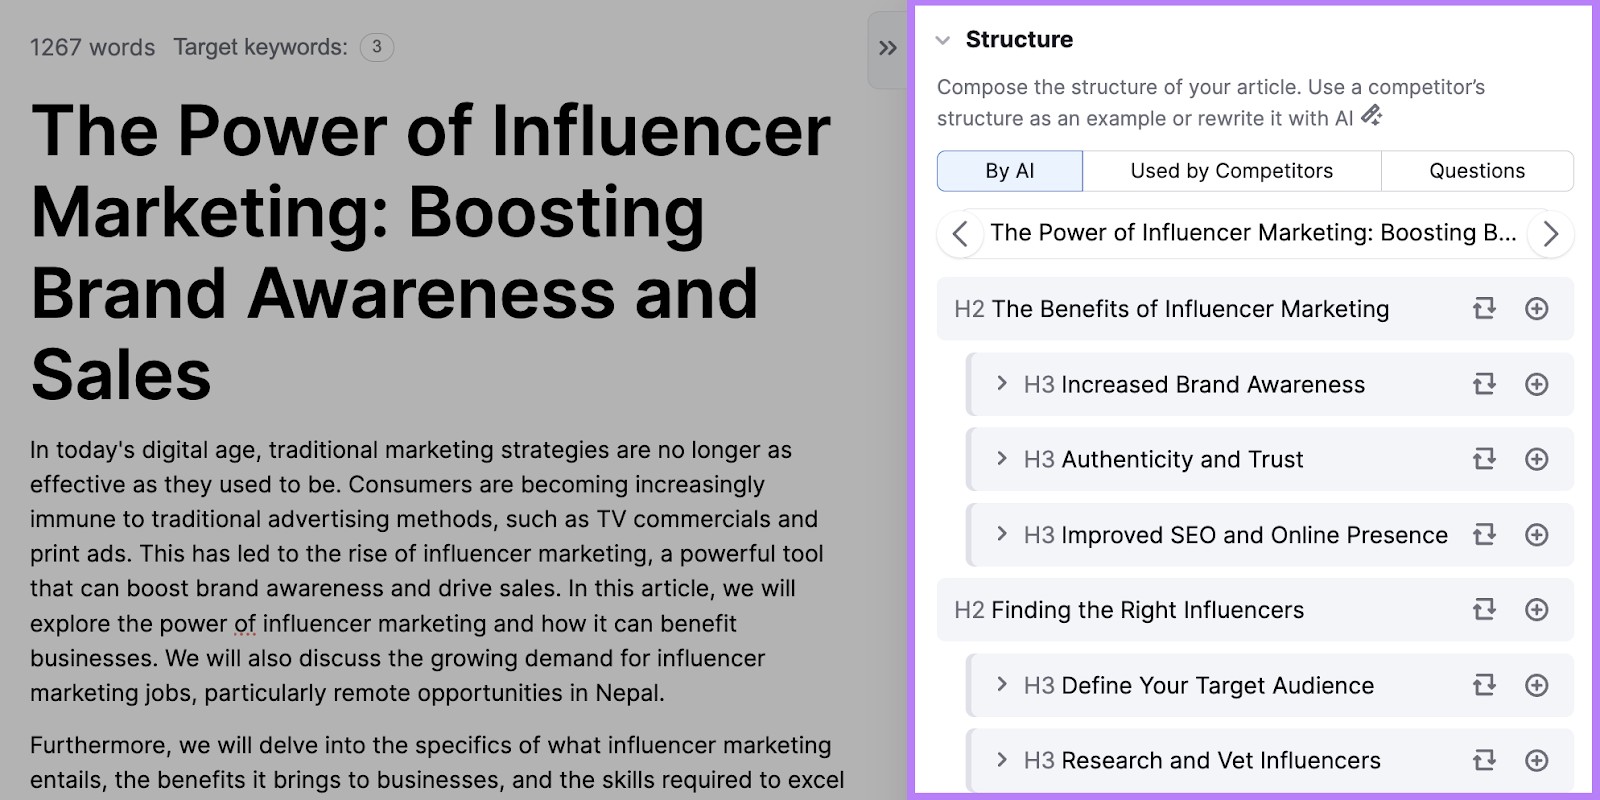 ContentShake outline for "influencer marketing" including suggested "Structure"